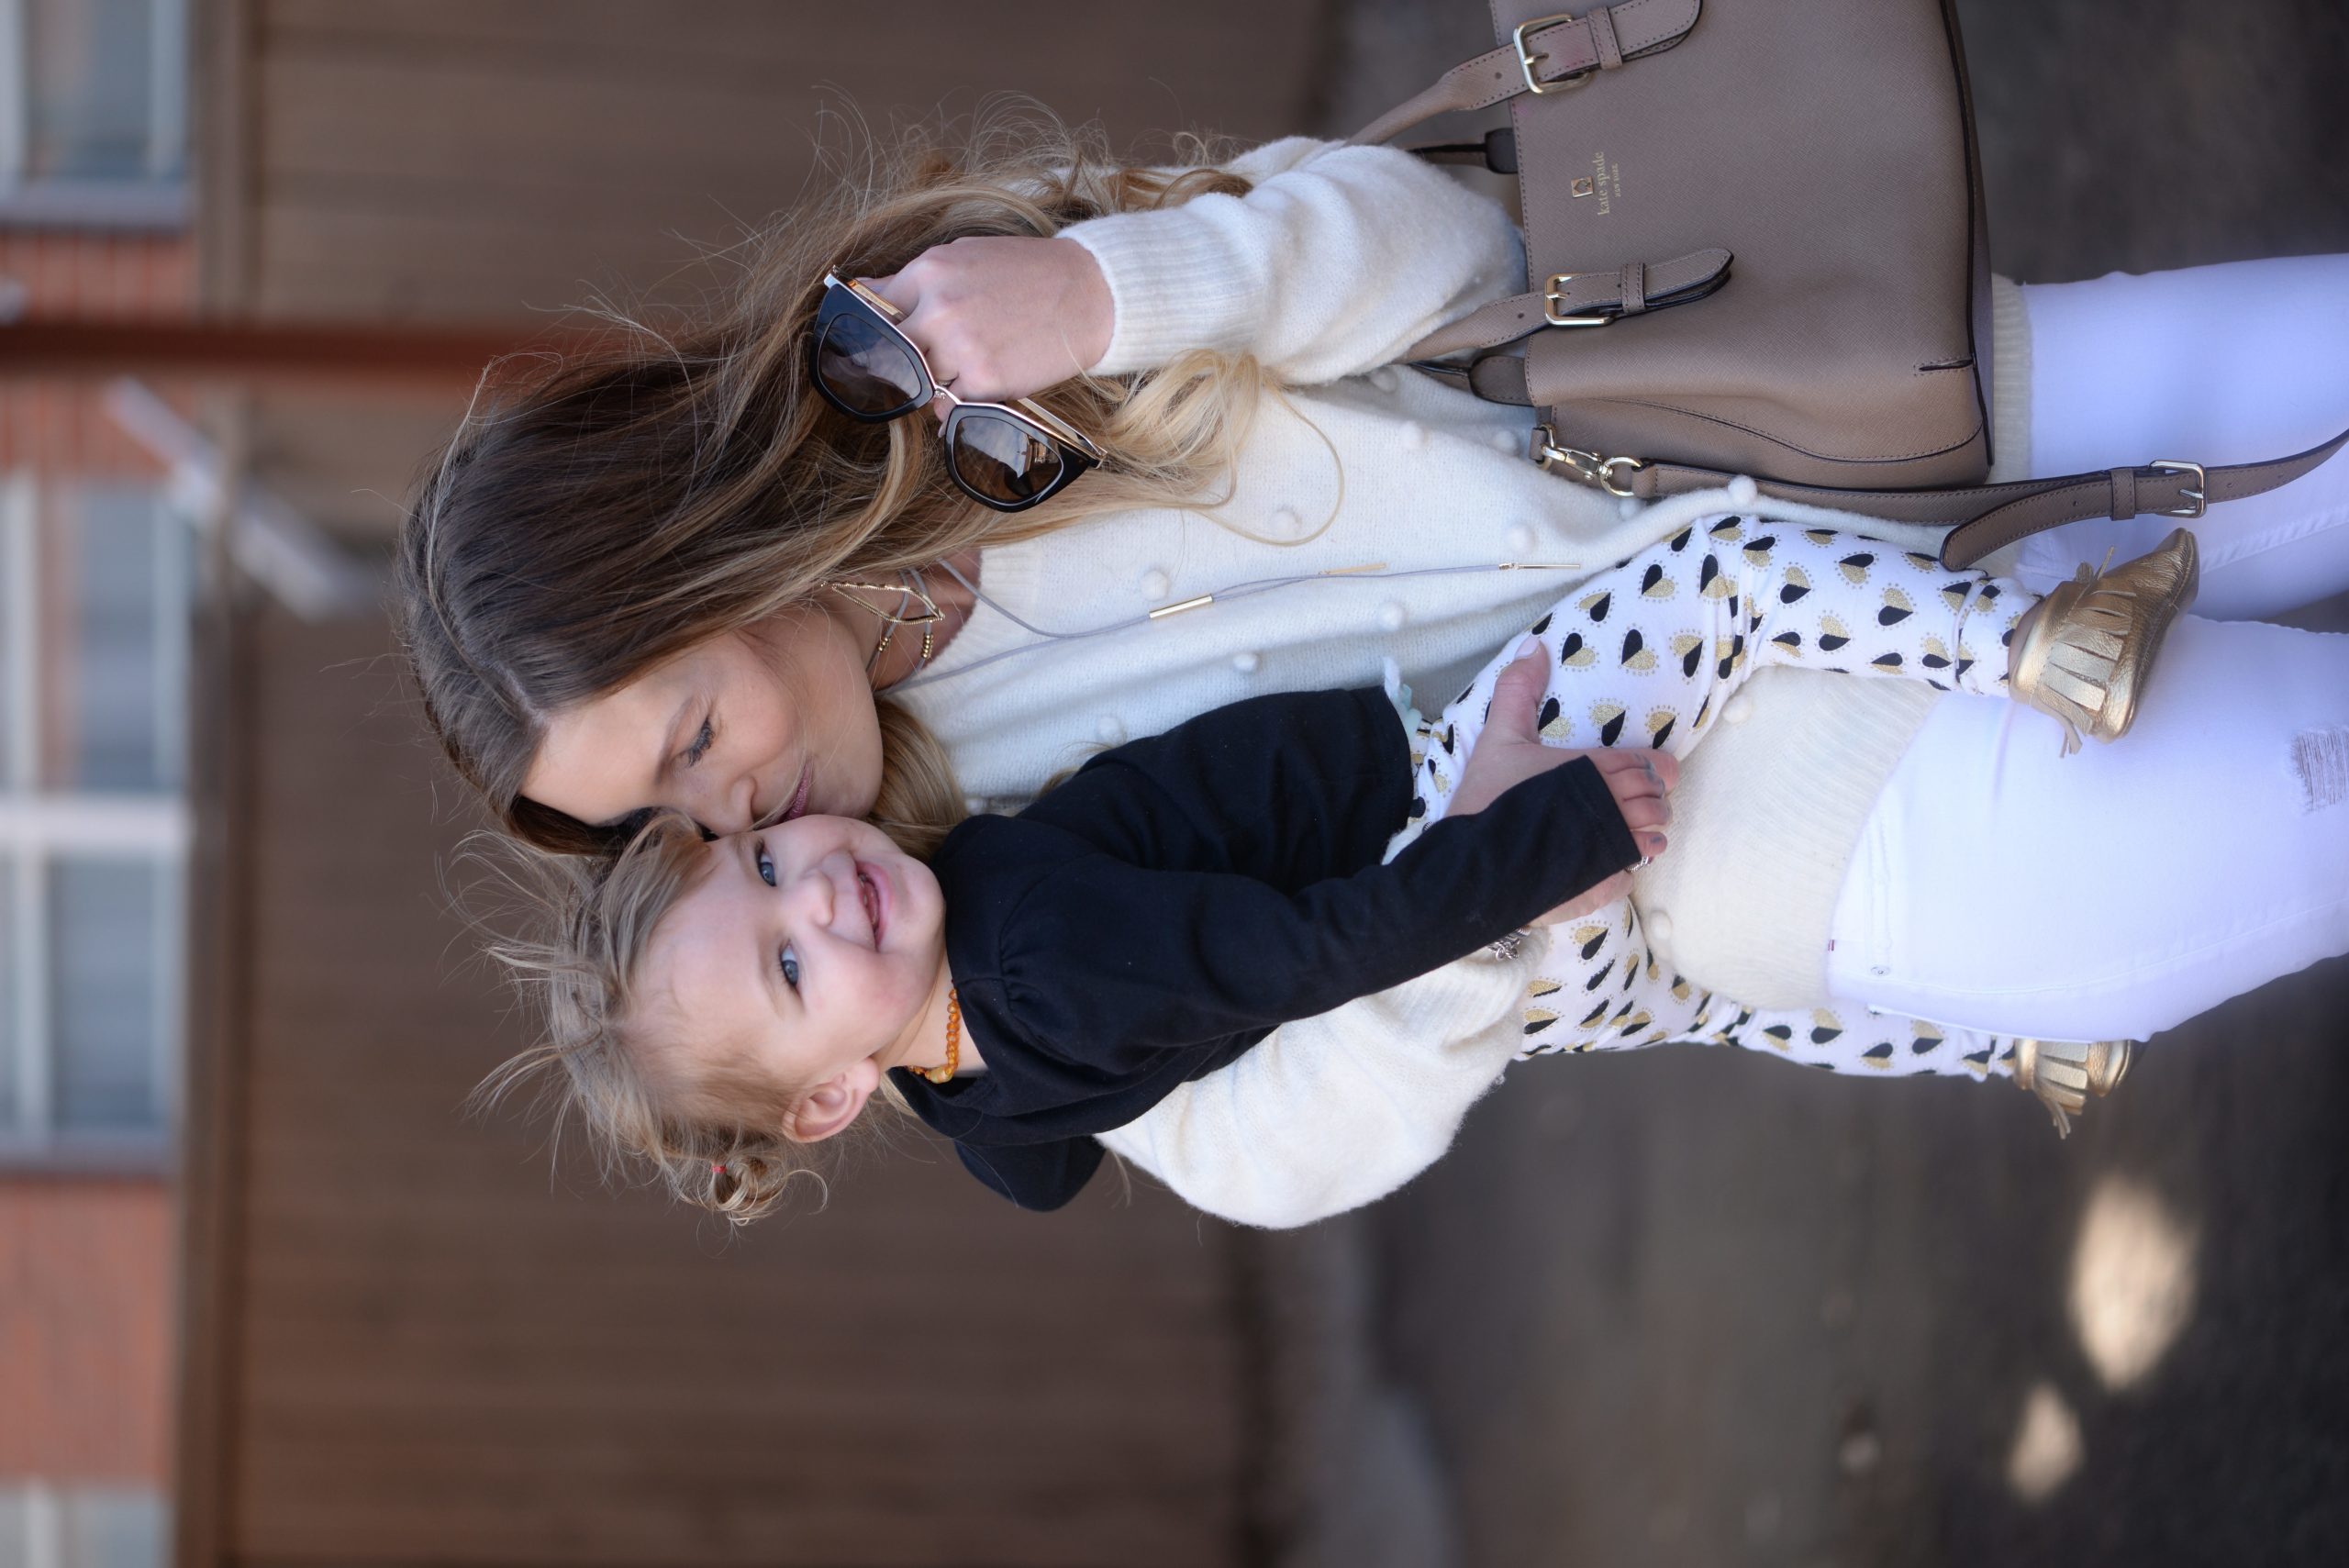 Moms need to gives themselves a break and give themselves some grace! You're all doing a rockstar job, so click to find out what my small victories in motherhood are!